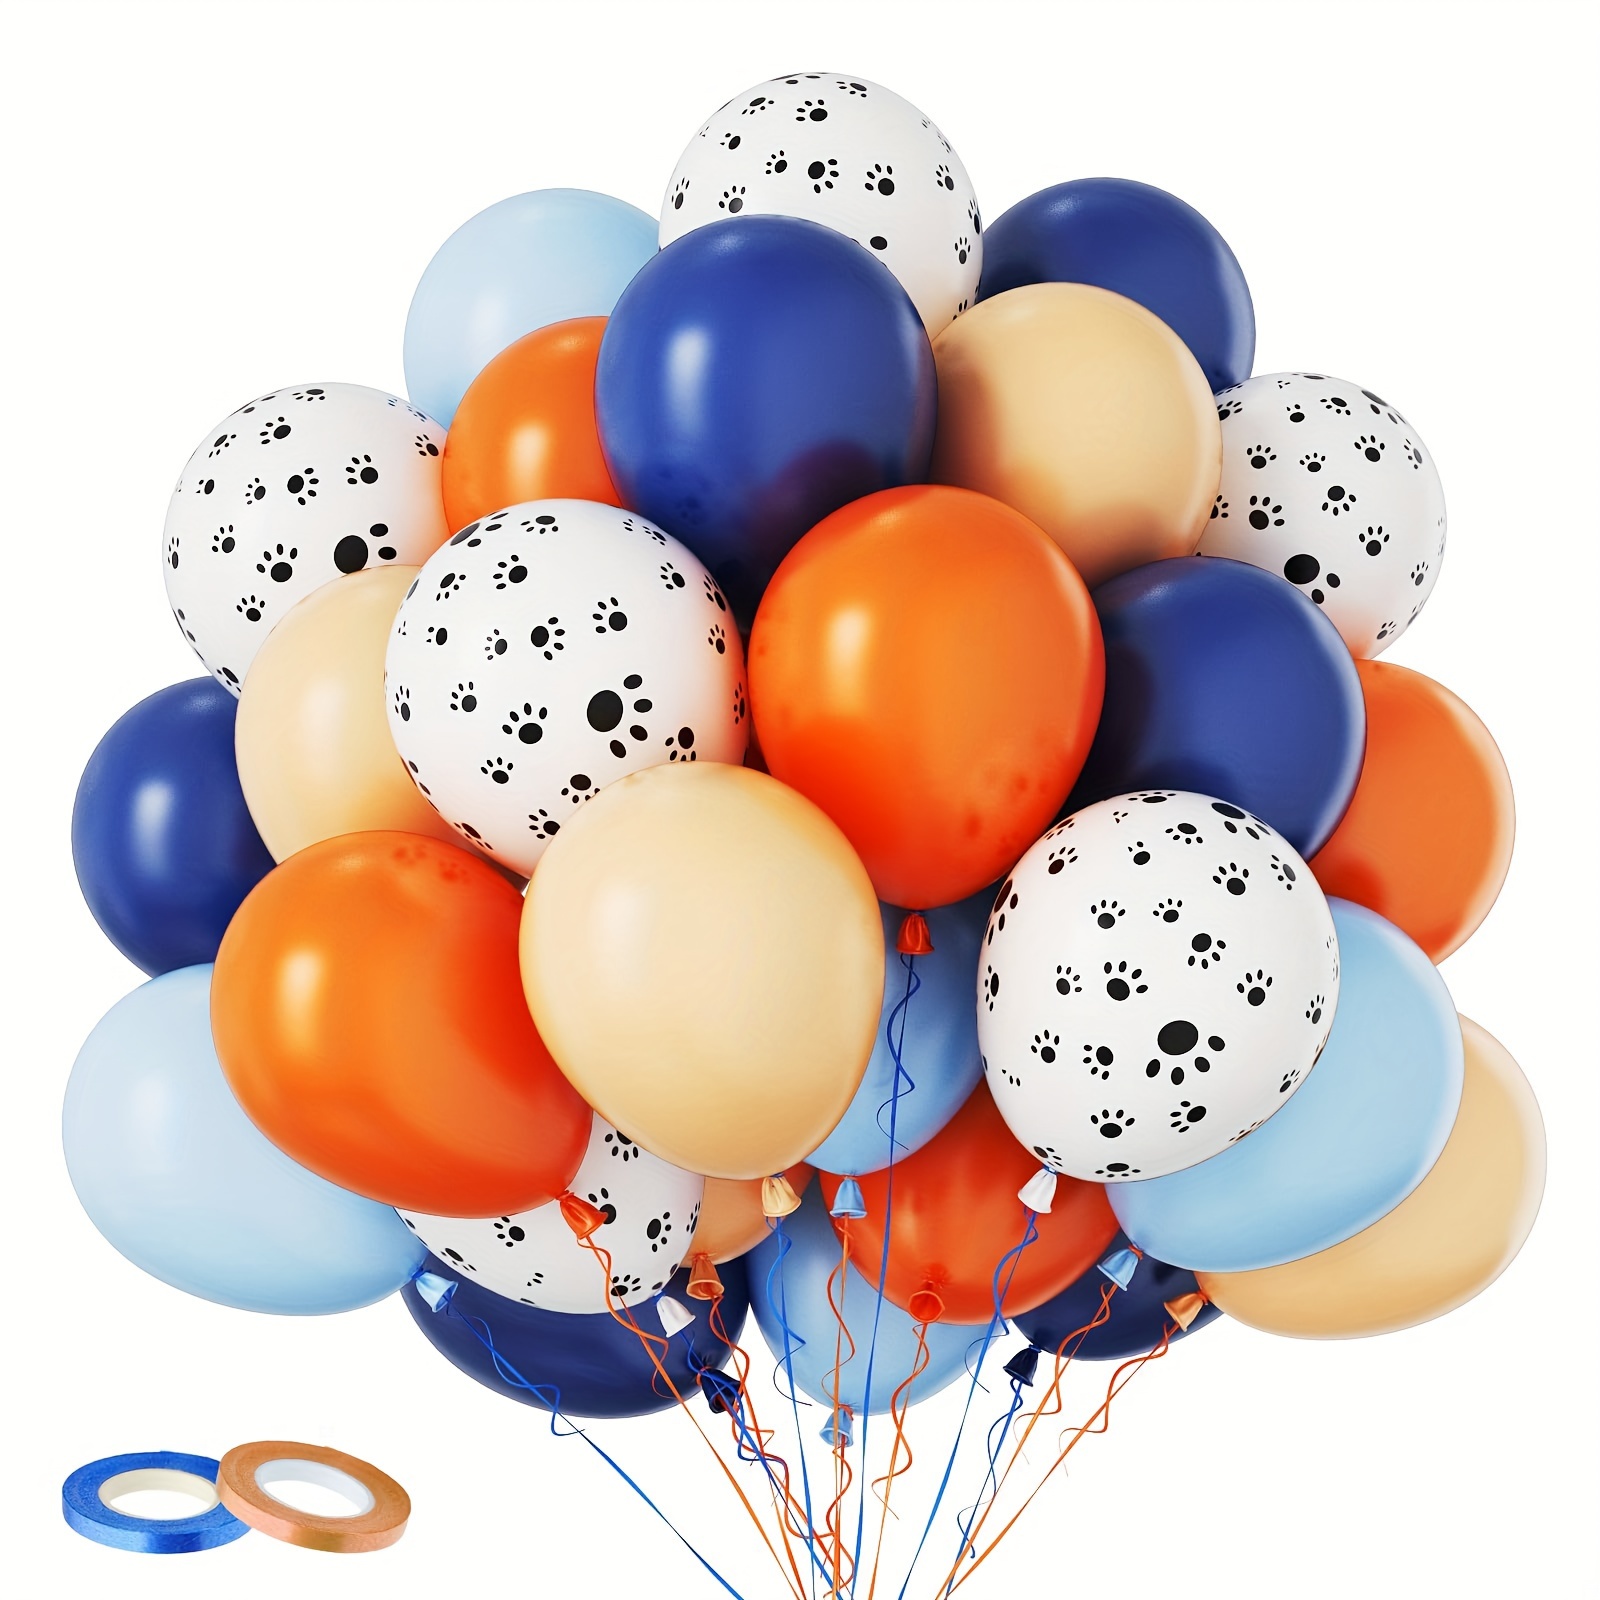 

Party Balloons - 60pc Blue & Orange Latex Set For Dog-themed Birthdays, Weddings & Celebrations - Perfect For Indoor & Outdoor Decor